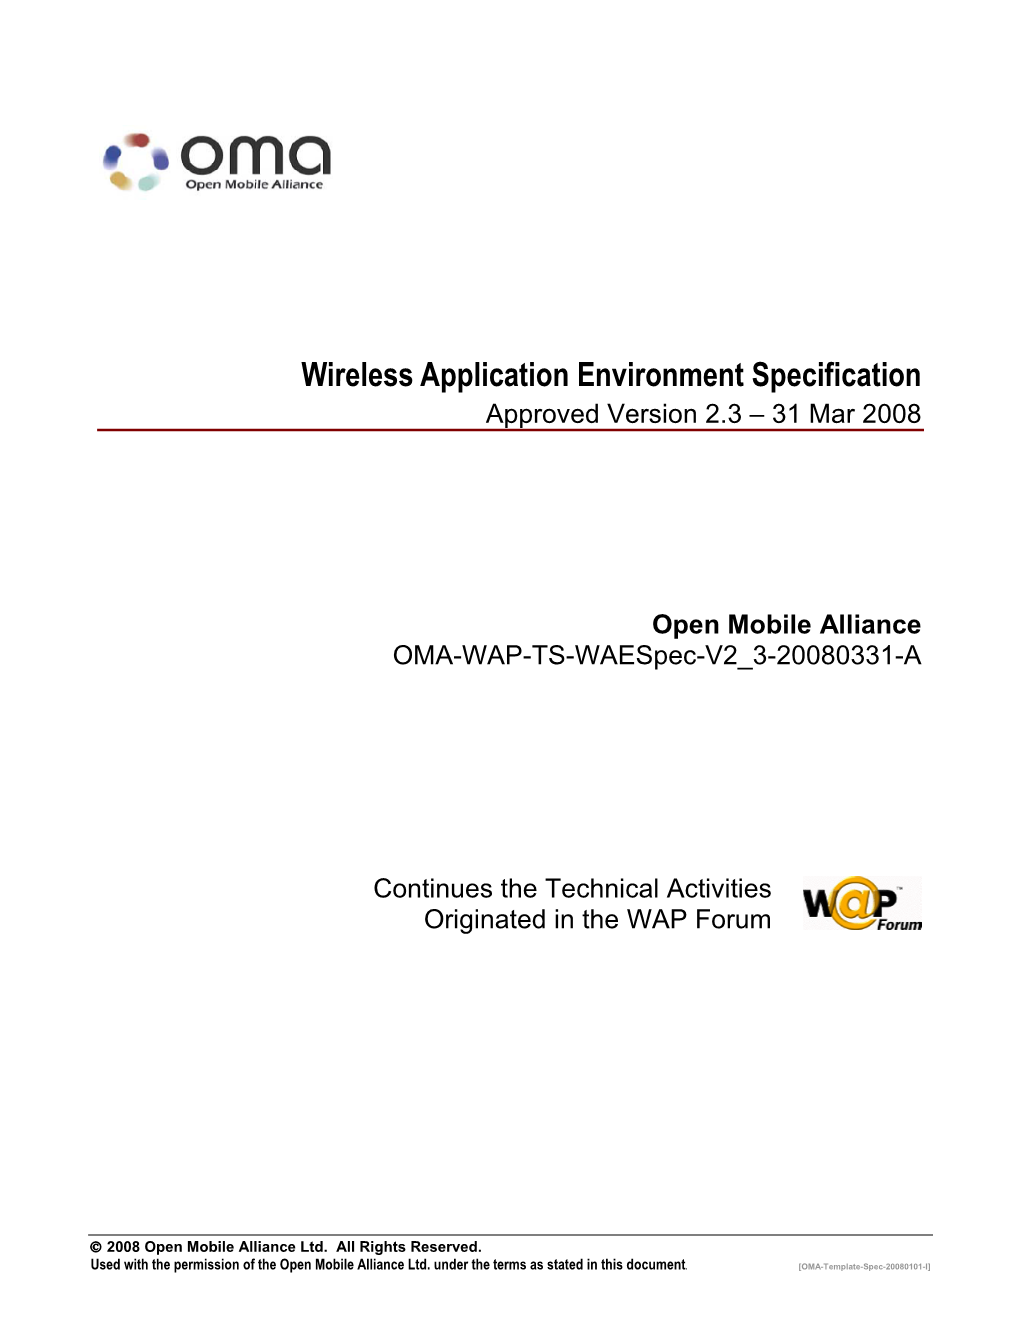 Wireless Application Environment Specification Approved Version 2.3 – 31 Mar 2008